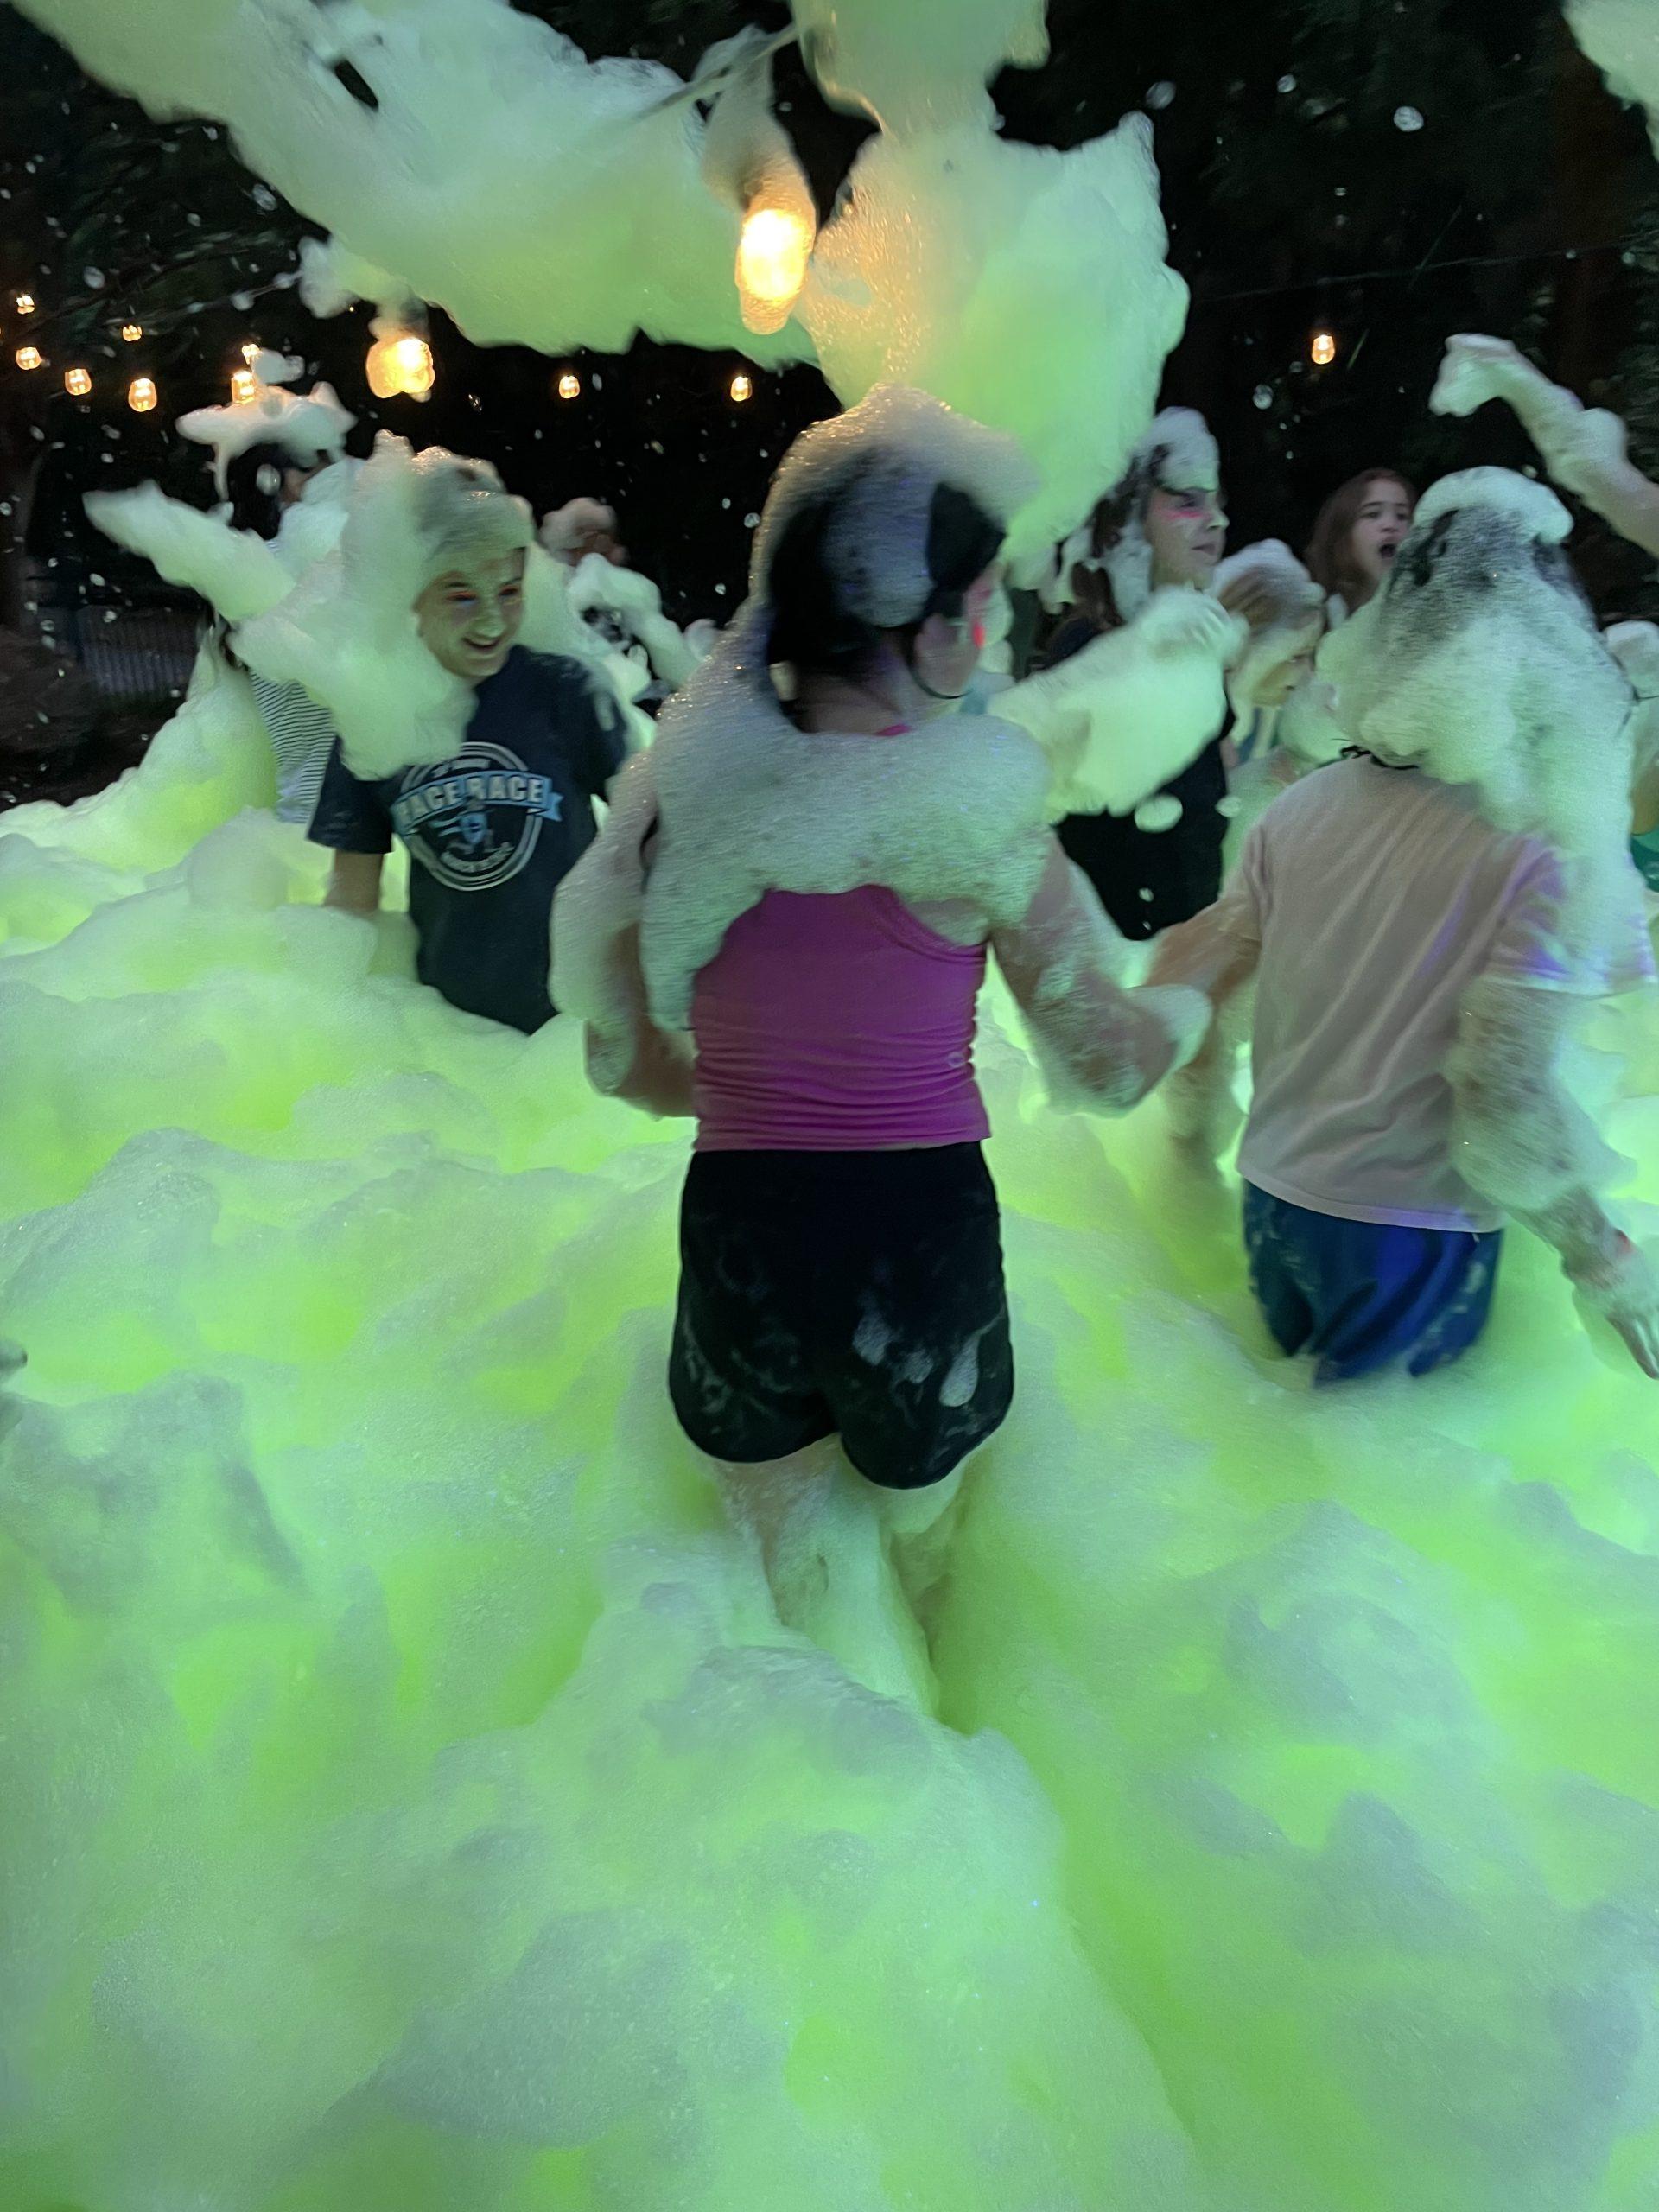 Hosting a Glow Foam Party: Everything You Need to Know